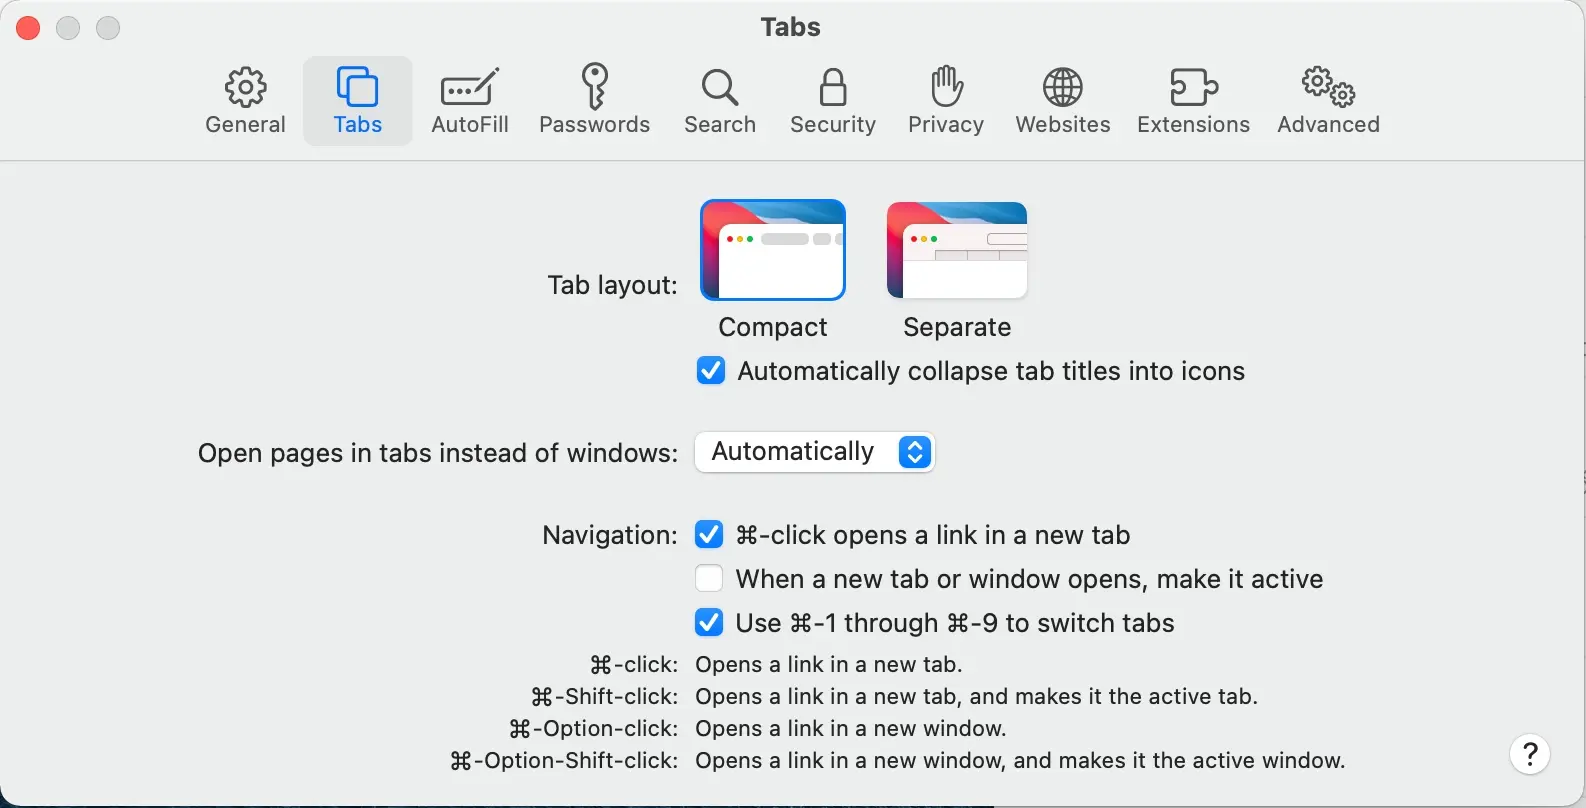 ontop.vn how to change safari tab layout